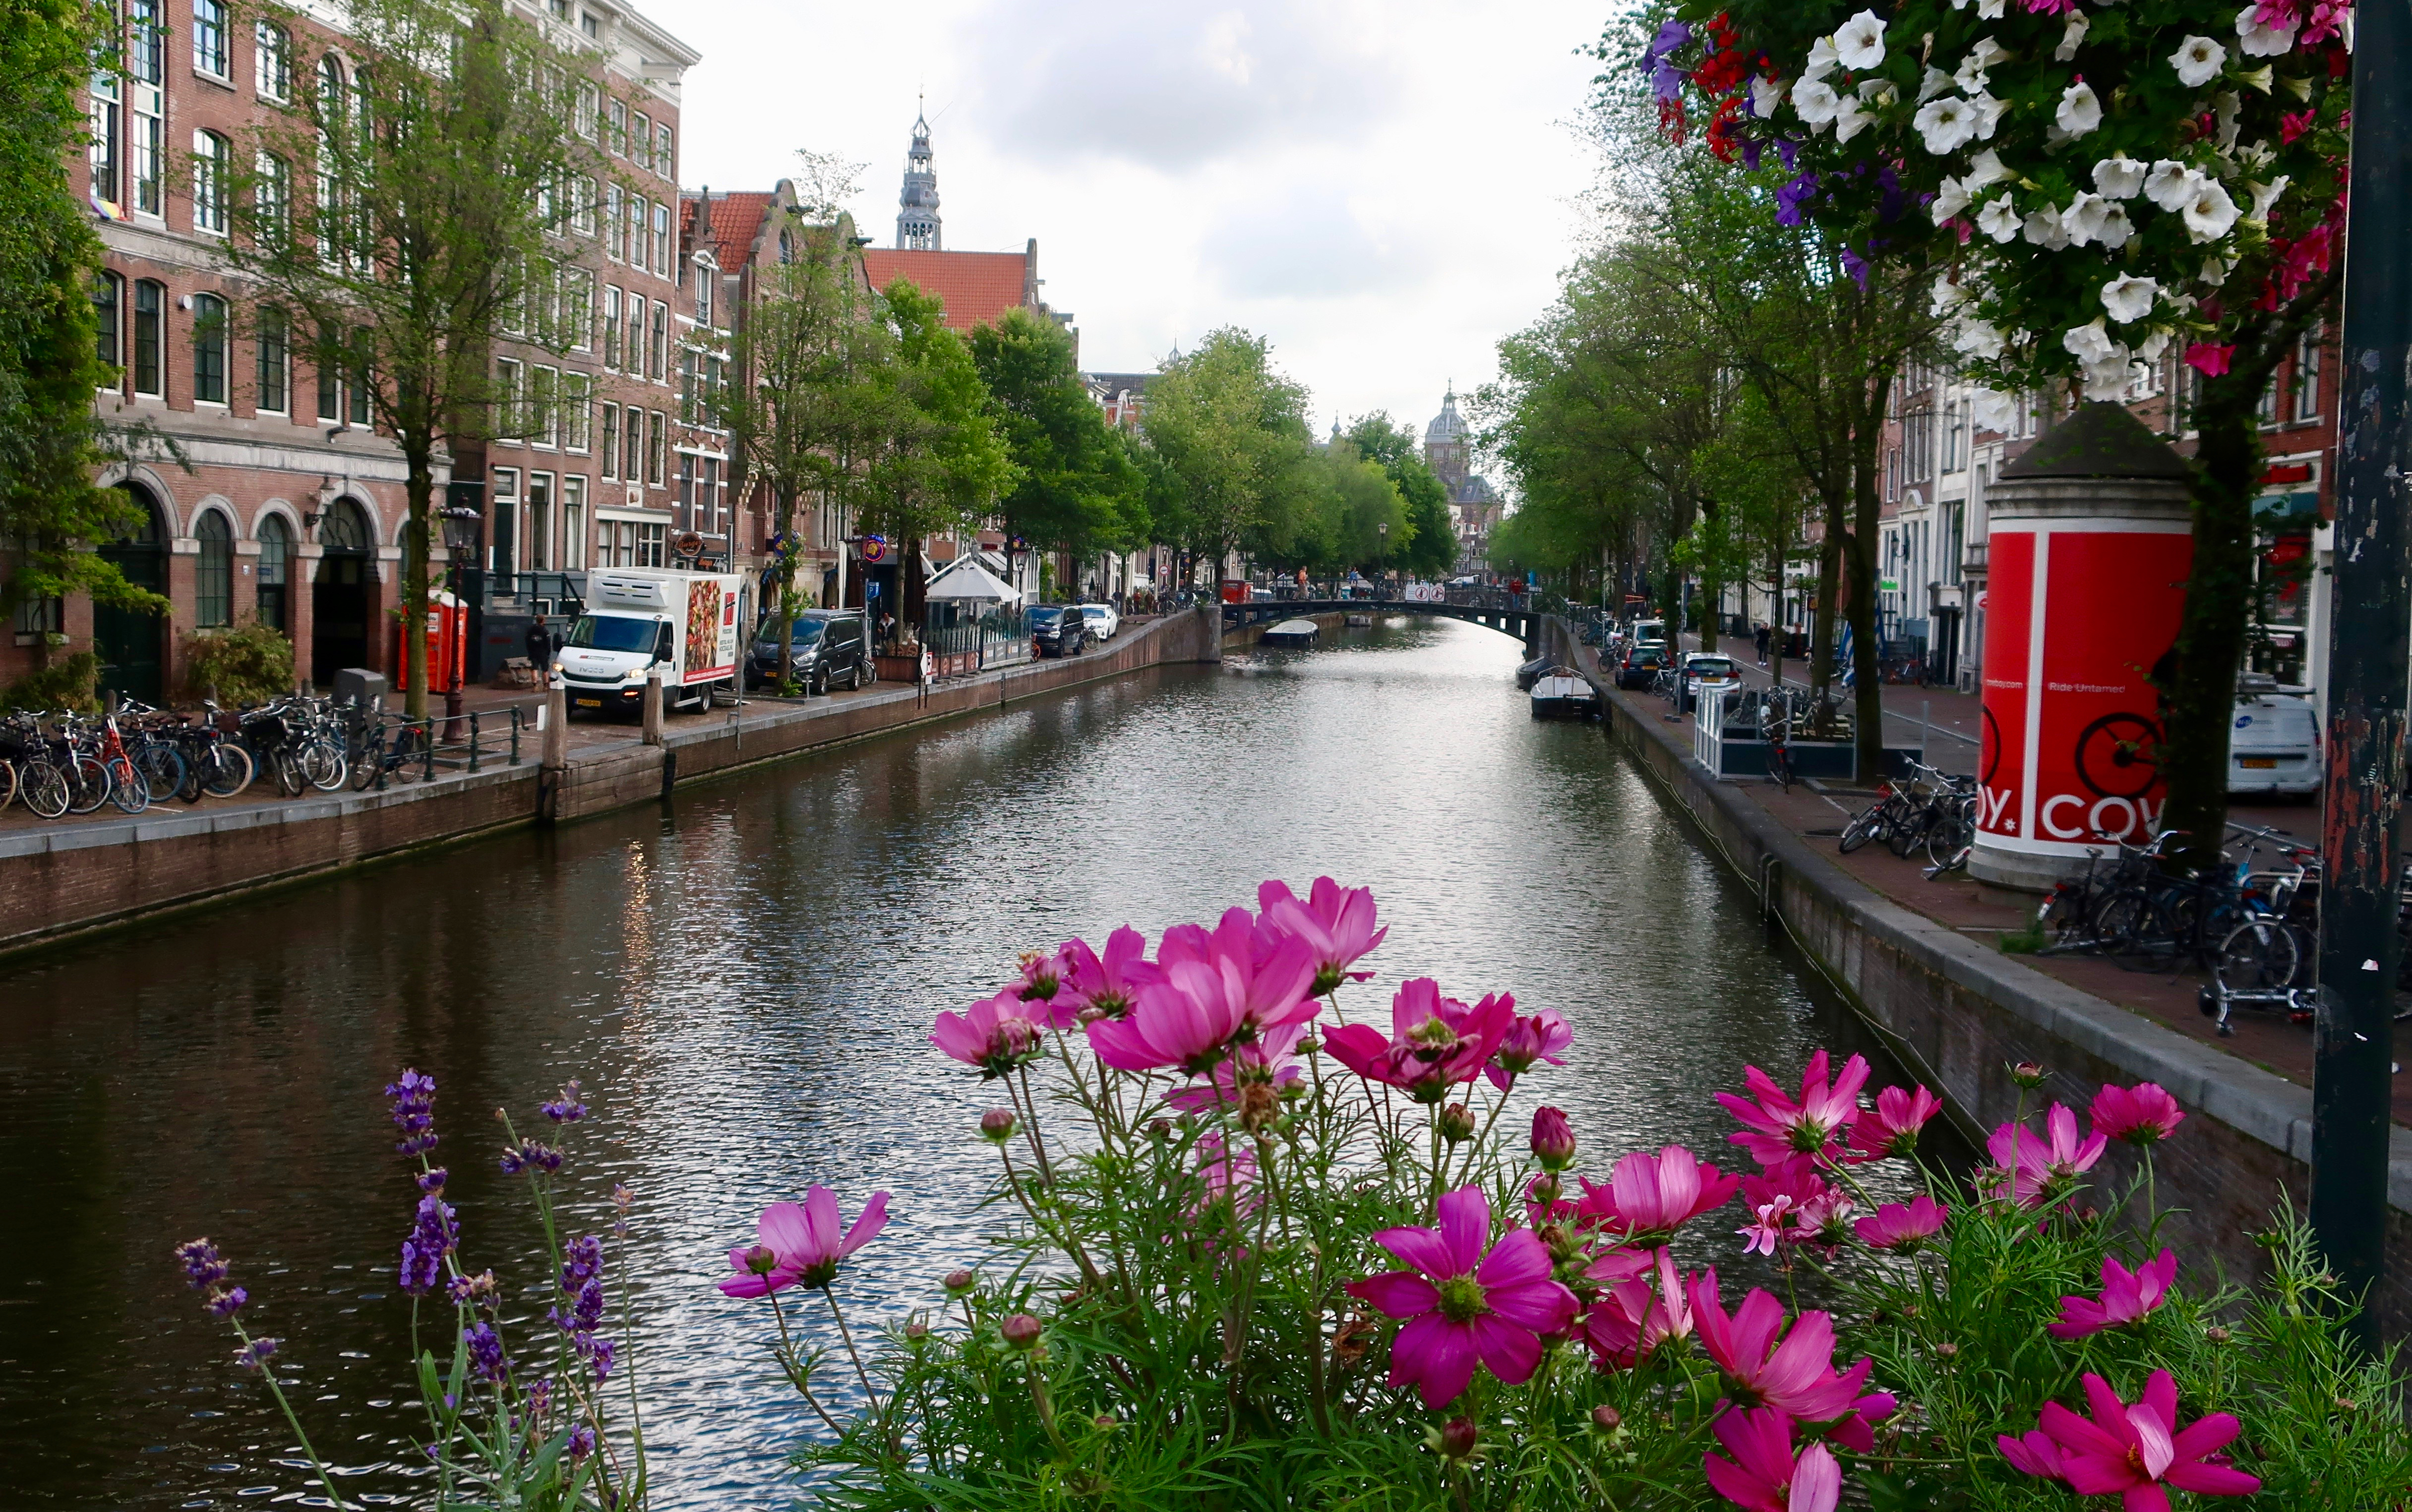 Photo of Amsterdam canal with flowers by Curt Mekemson.